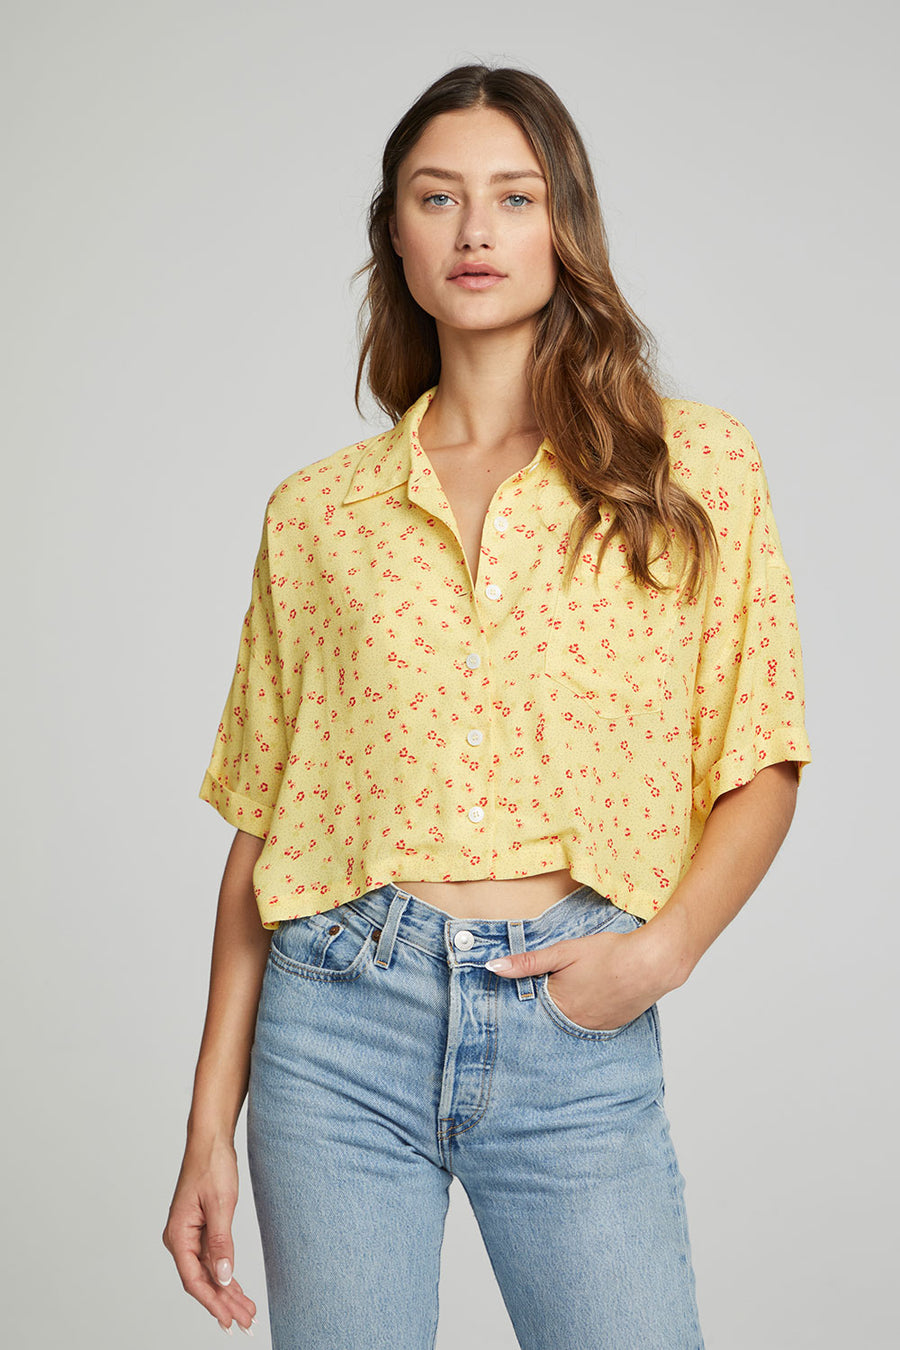 Marine Crop Button Down - Anise Flower WOMENS chaserbrand